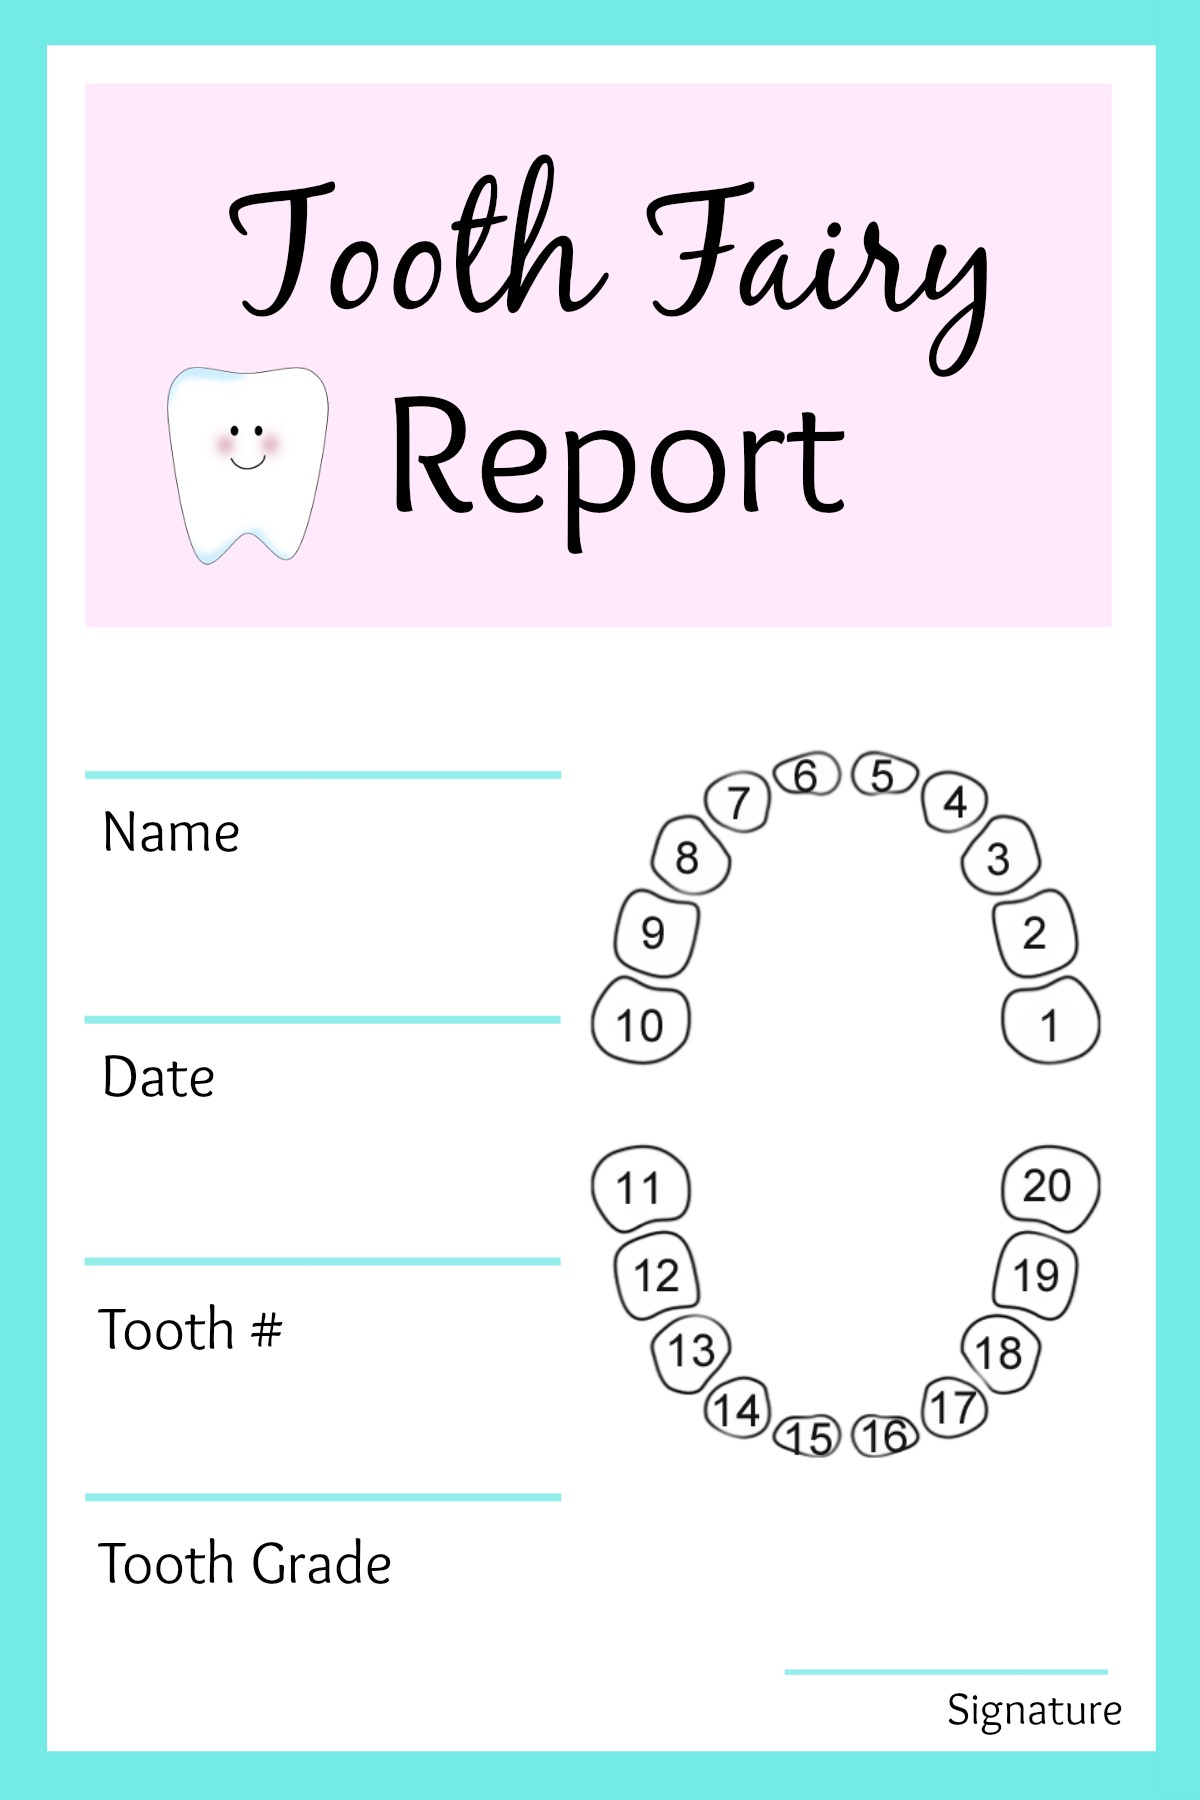 Easy Tooth Fairy Ideas &amp;amp; Tips For Parents / Free Printables - Free Printable Tooth Fairy Pictures